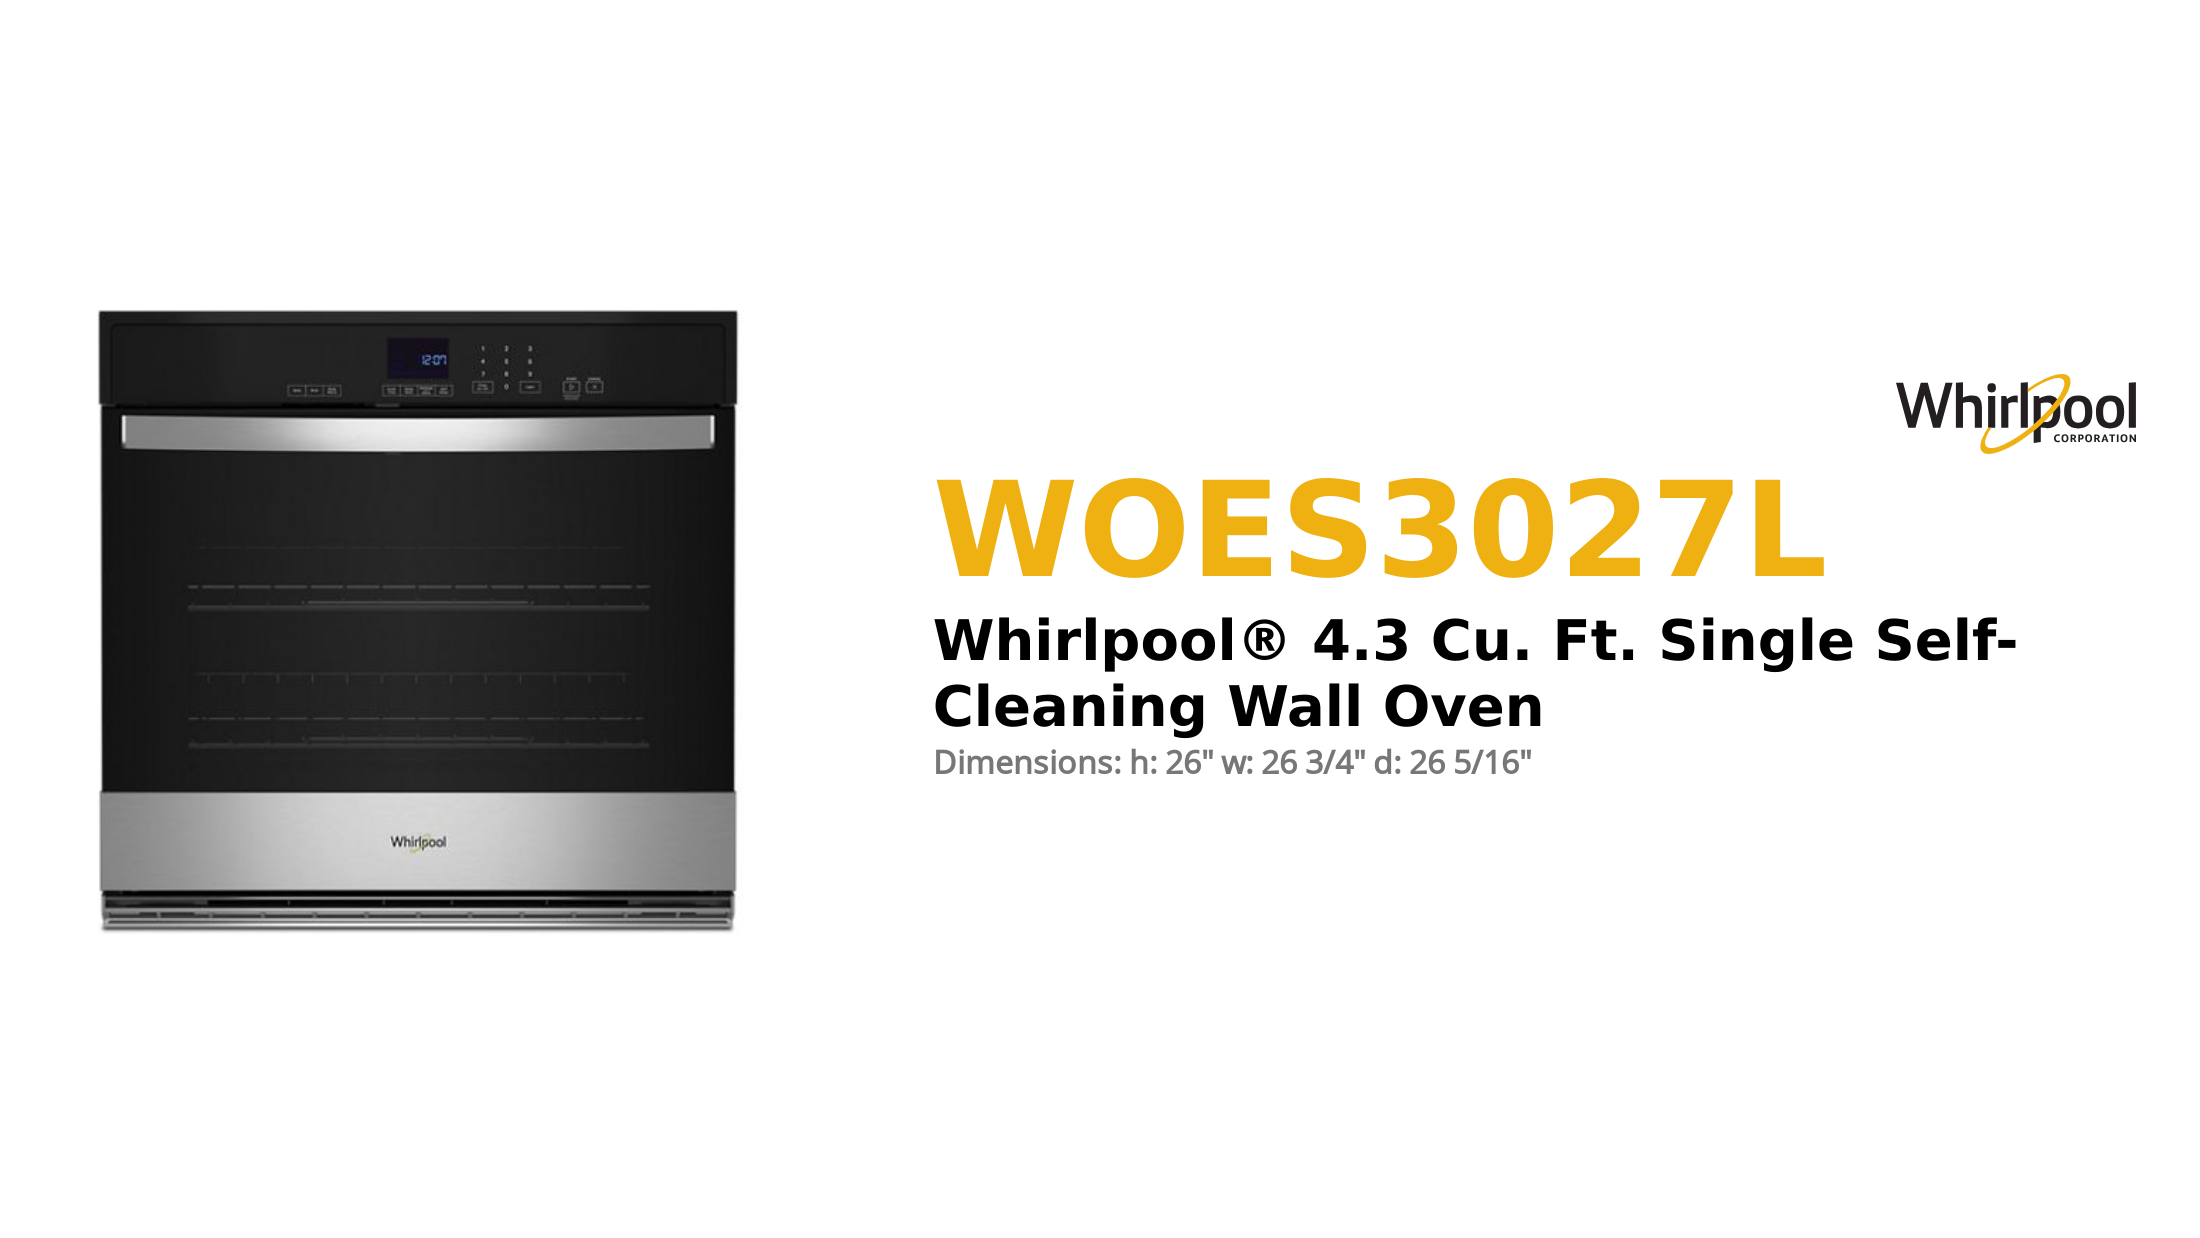 



WHIRLPOOL® 4.3 CU. FT. SINGLE SELF-CLEANING WALL OVEN



